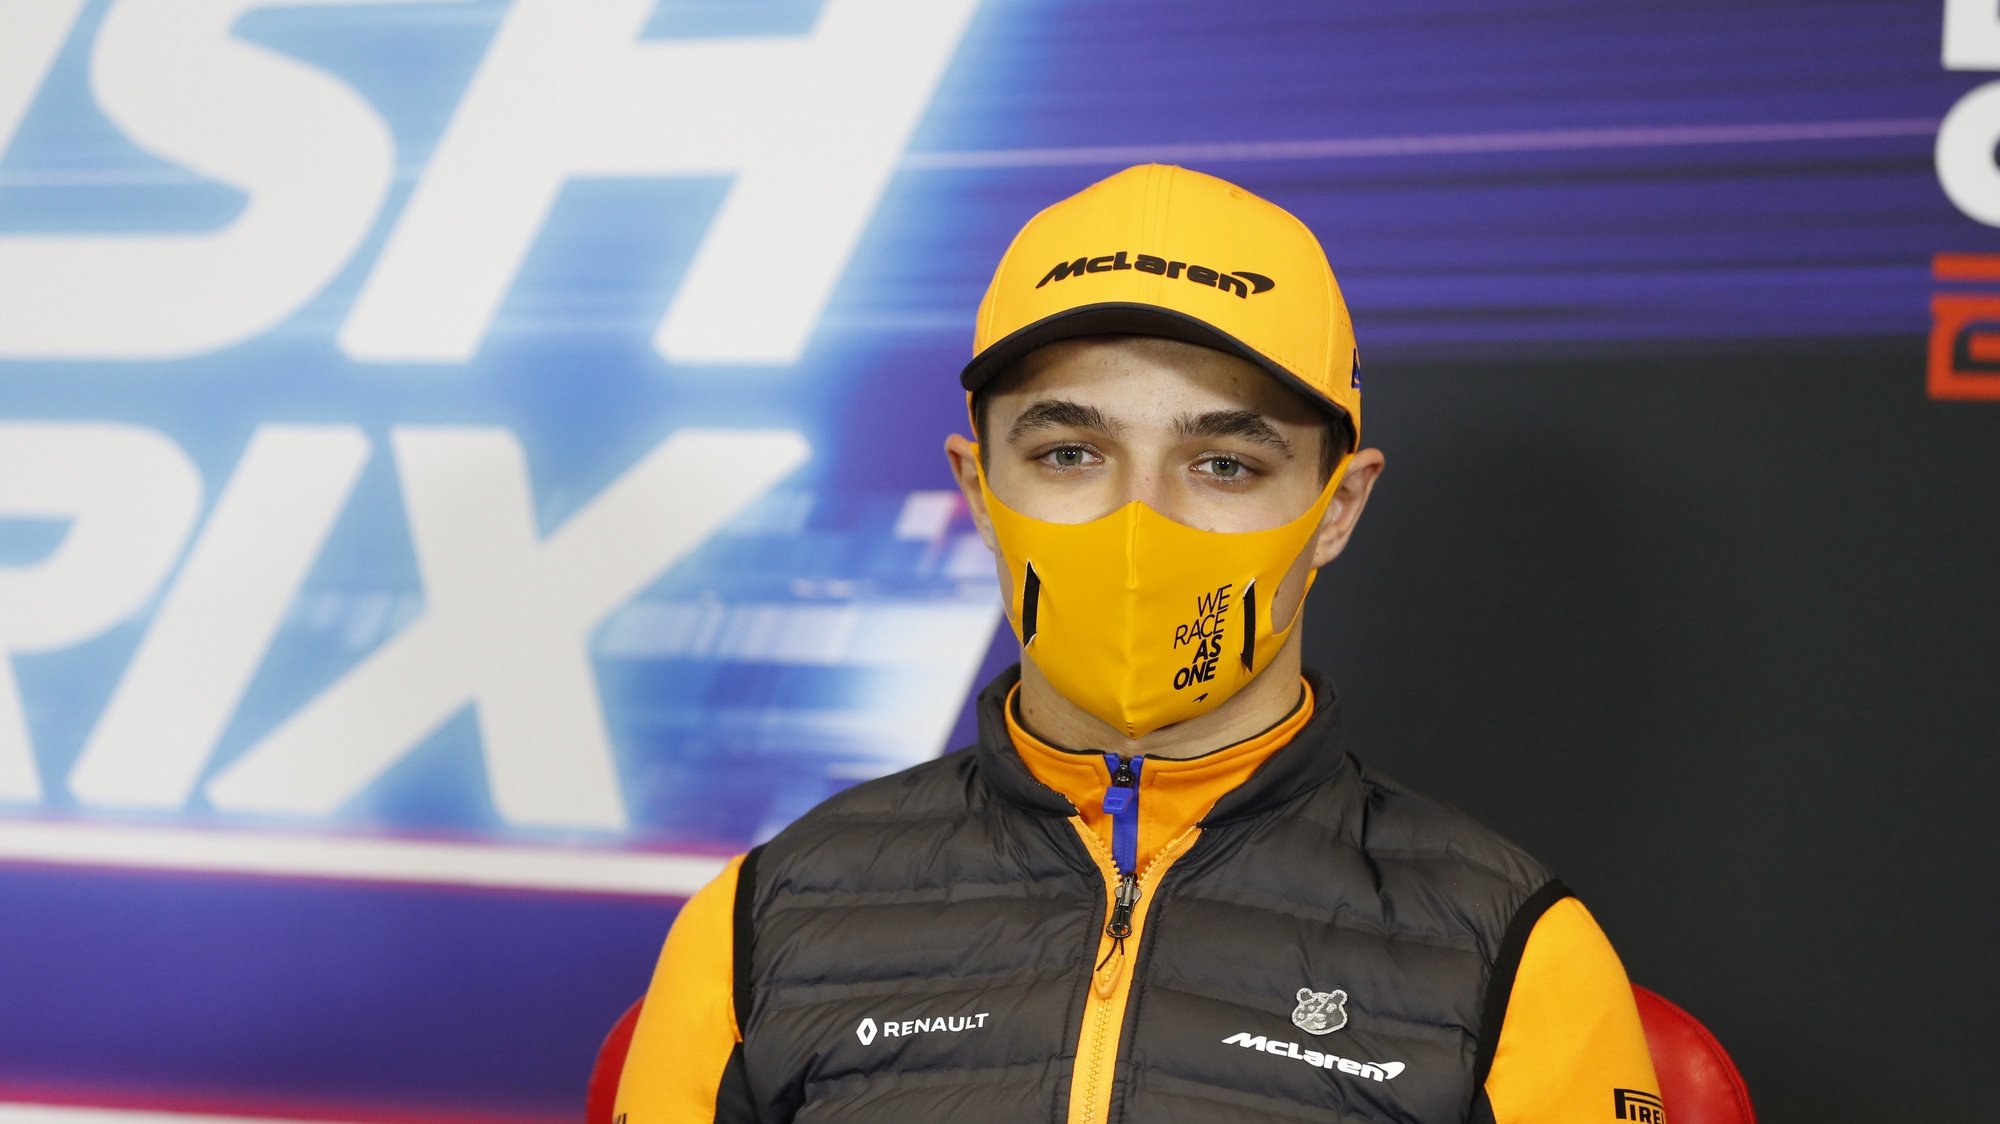 epa08815865 A handout photo made available by the FIA of British Formula One driver Lando Norris of McLaren wearing a protective face mask during a press conference in Istanbul, Turkey, 12 November 2020. The Formula One Grand Prix of Turkey will take place on 15 November 2020 at Intercity Istanbul Park.  EPA/Antonin Vincent - FIA/F1 HANDOUT  SHUTTERSTOCK OUT HANDOUT EDITORIAL USE ONLY/NO SALES